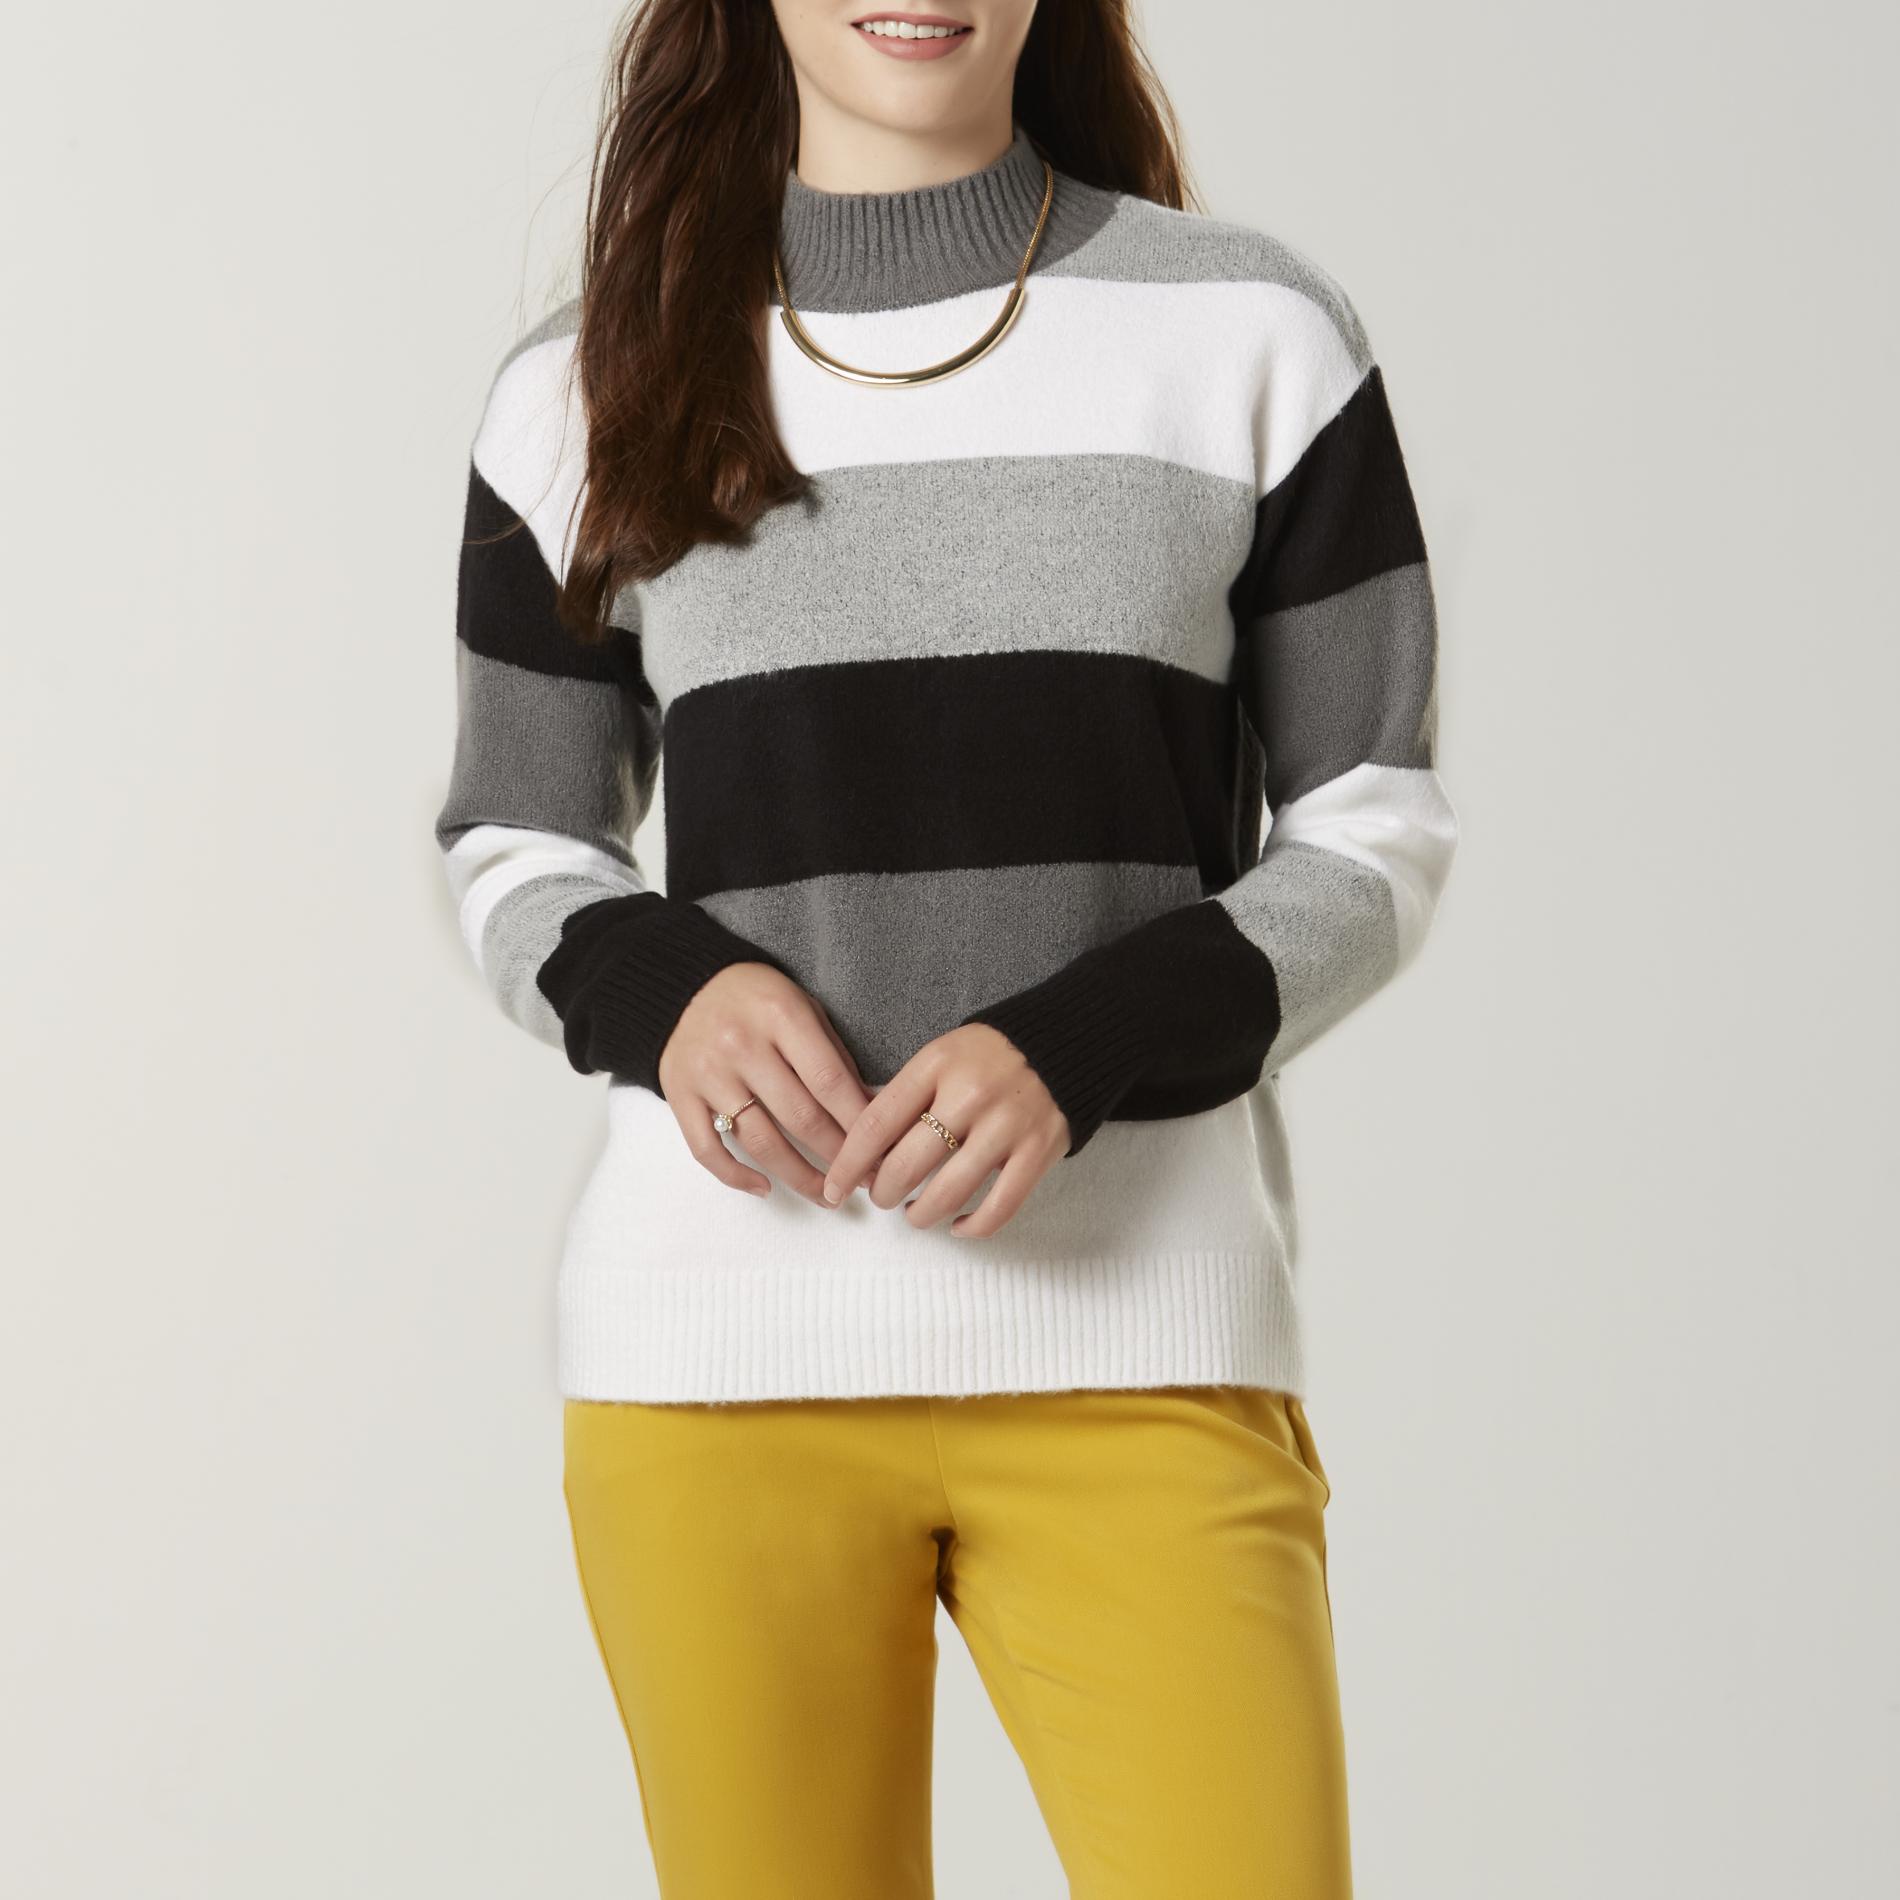 Simply Styled Women's Mock Neck Sweater - Striped